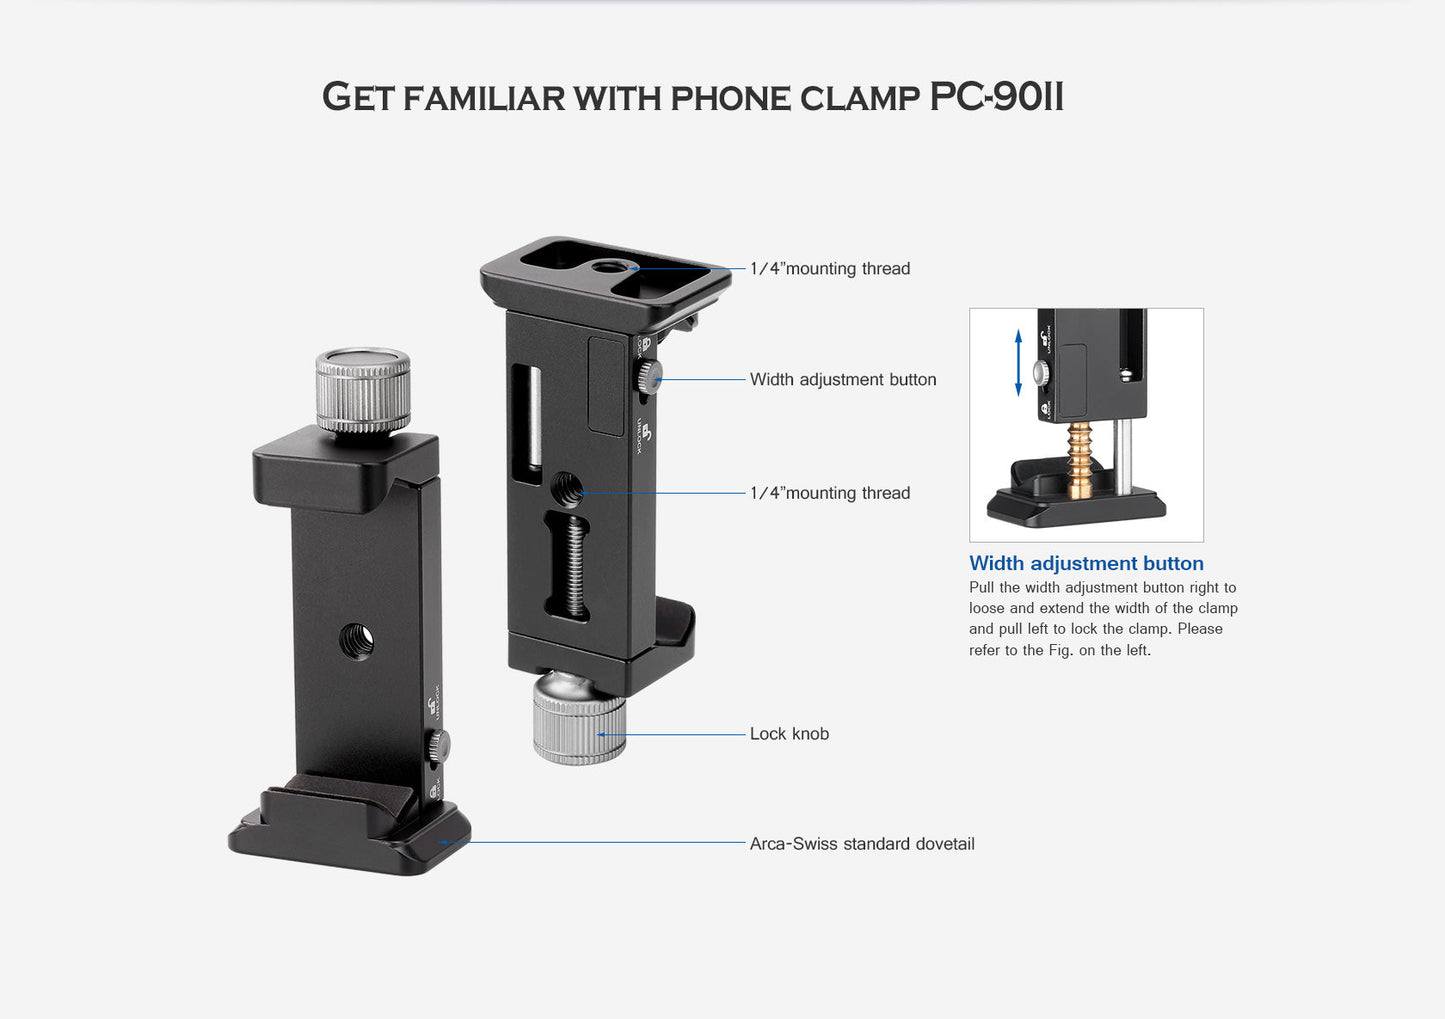 
                  
                    Leofoto PC-90II Adjustable Smartphone Clamp with Locking Width and Arca-Compatible Base
                  
                